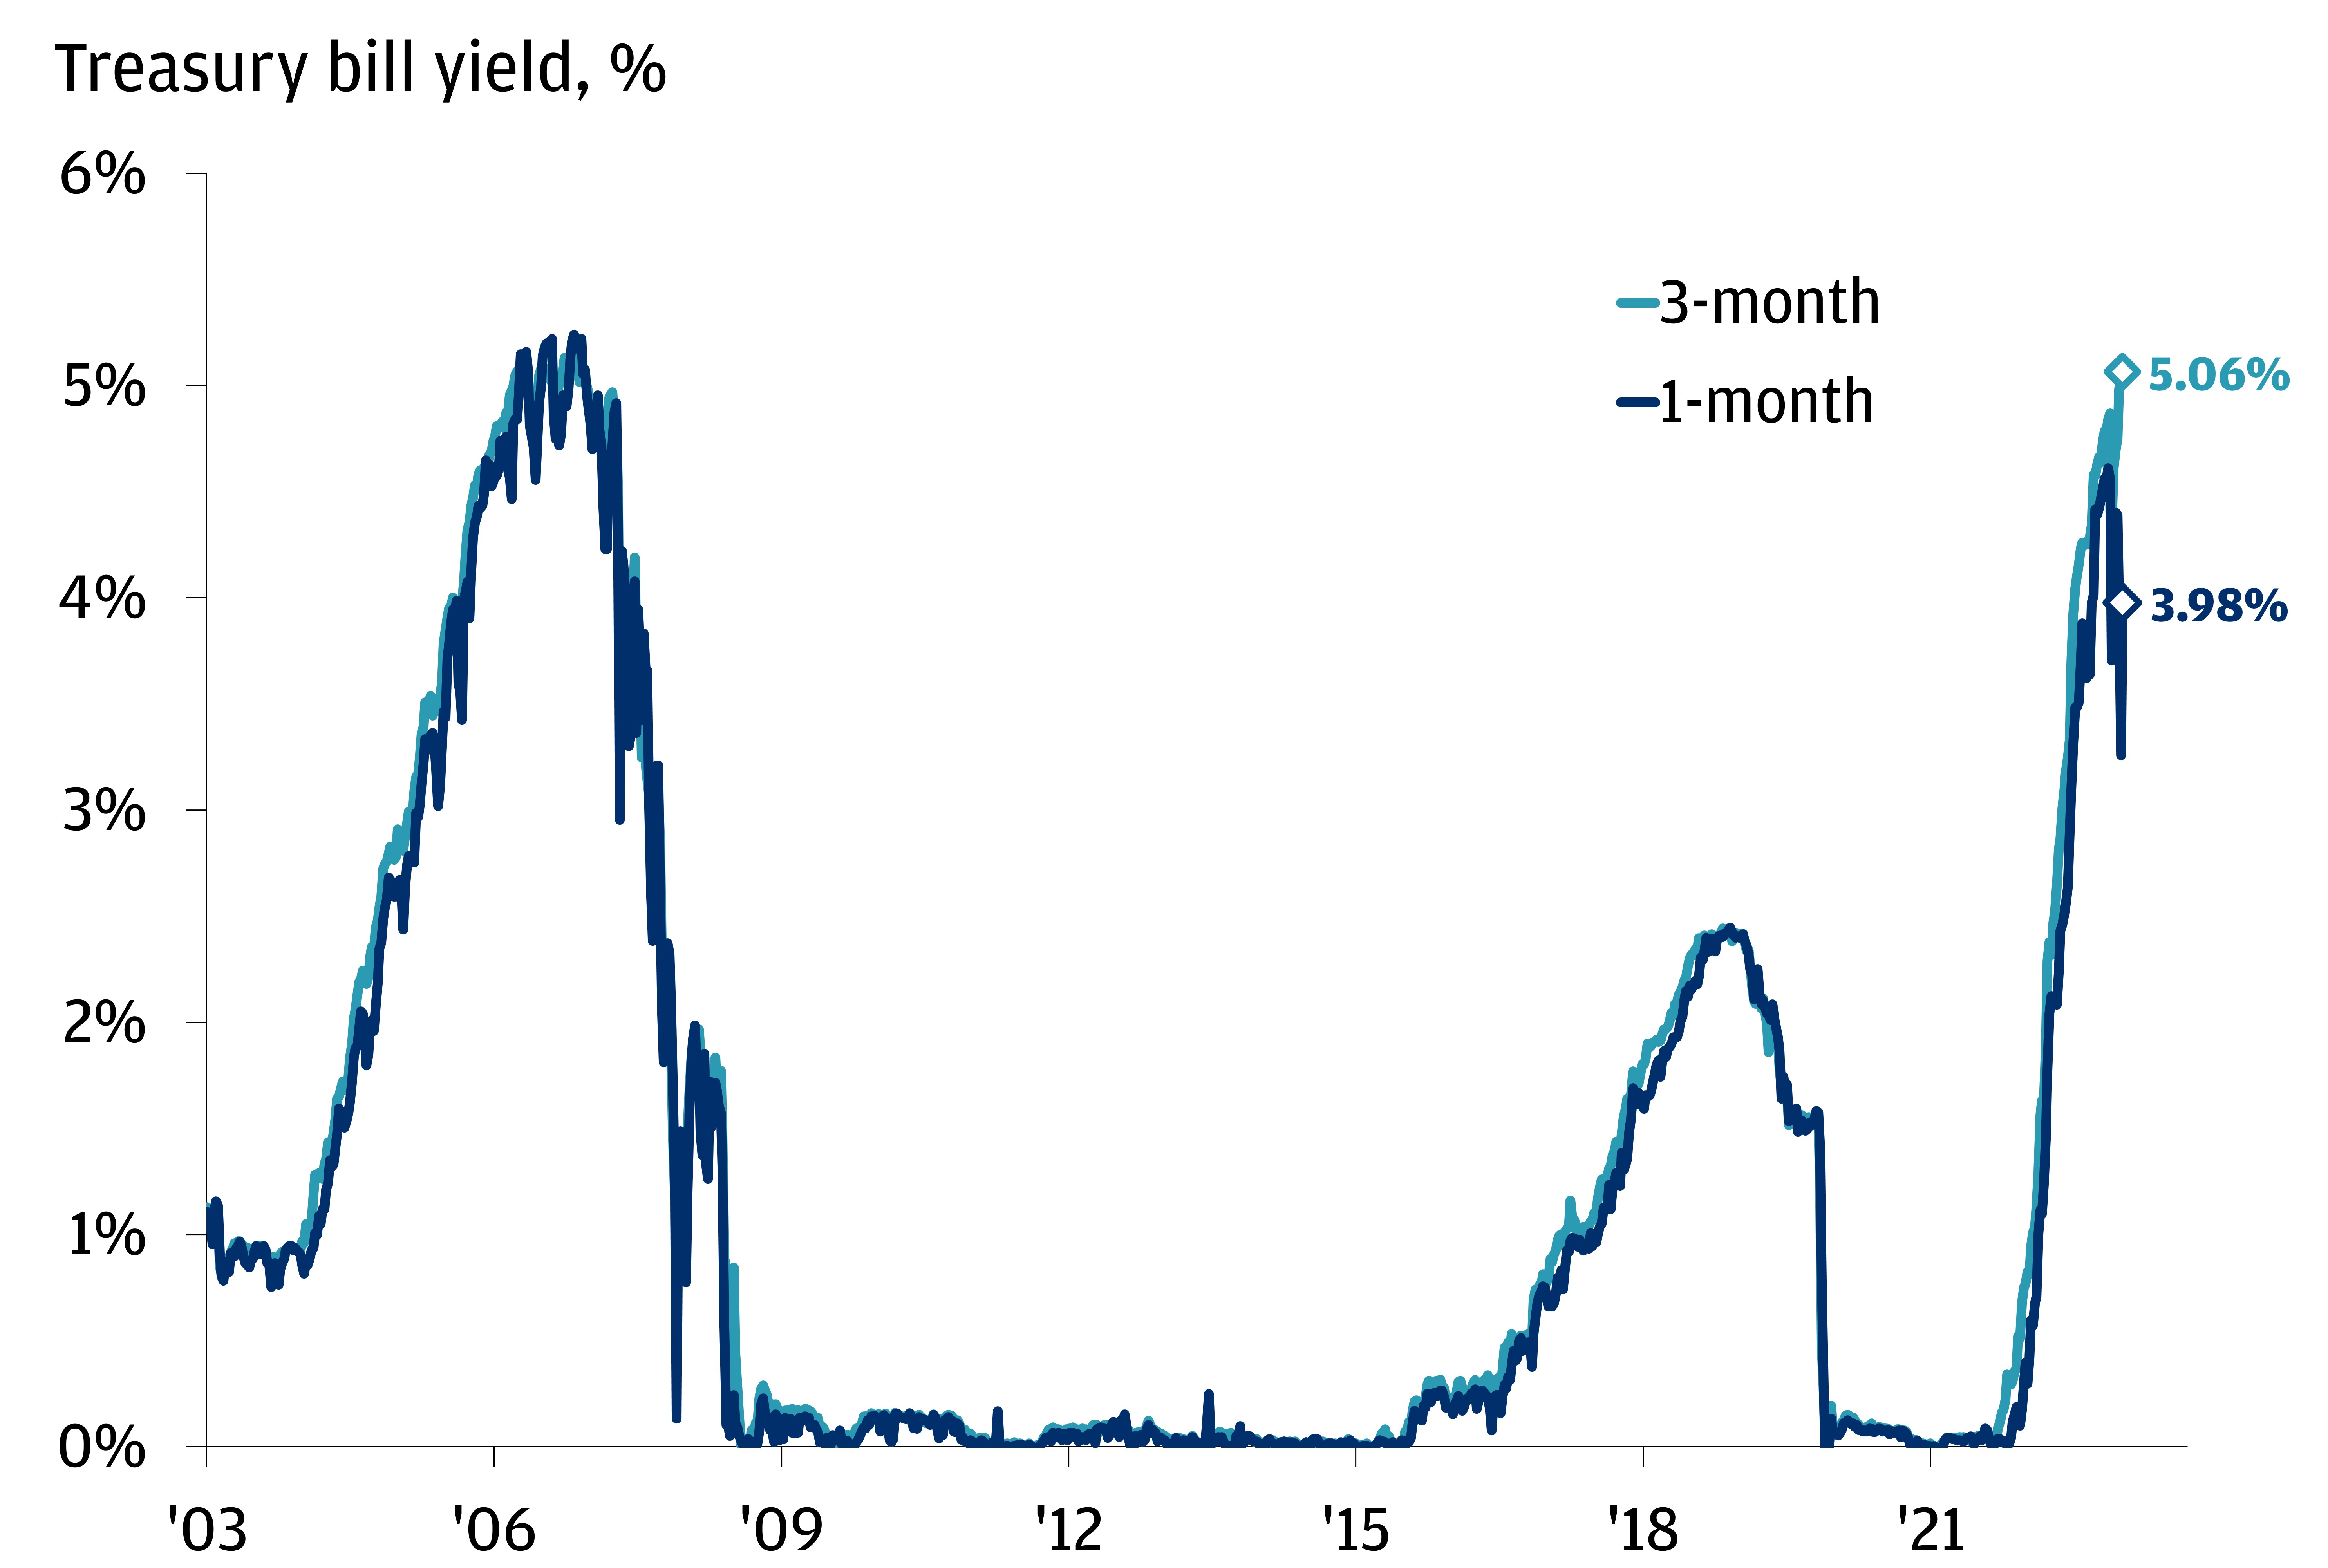 This chart describes 1-month and 3-month Treasury bill yields on two lines. 